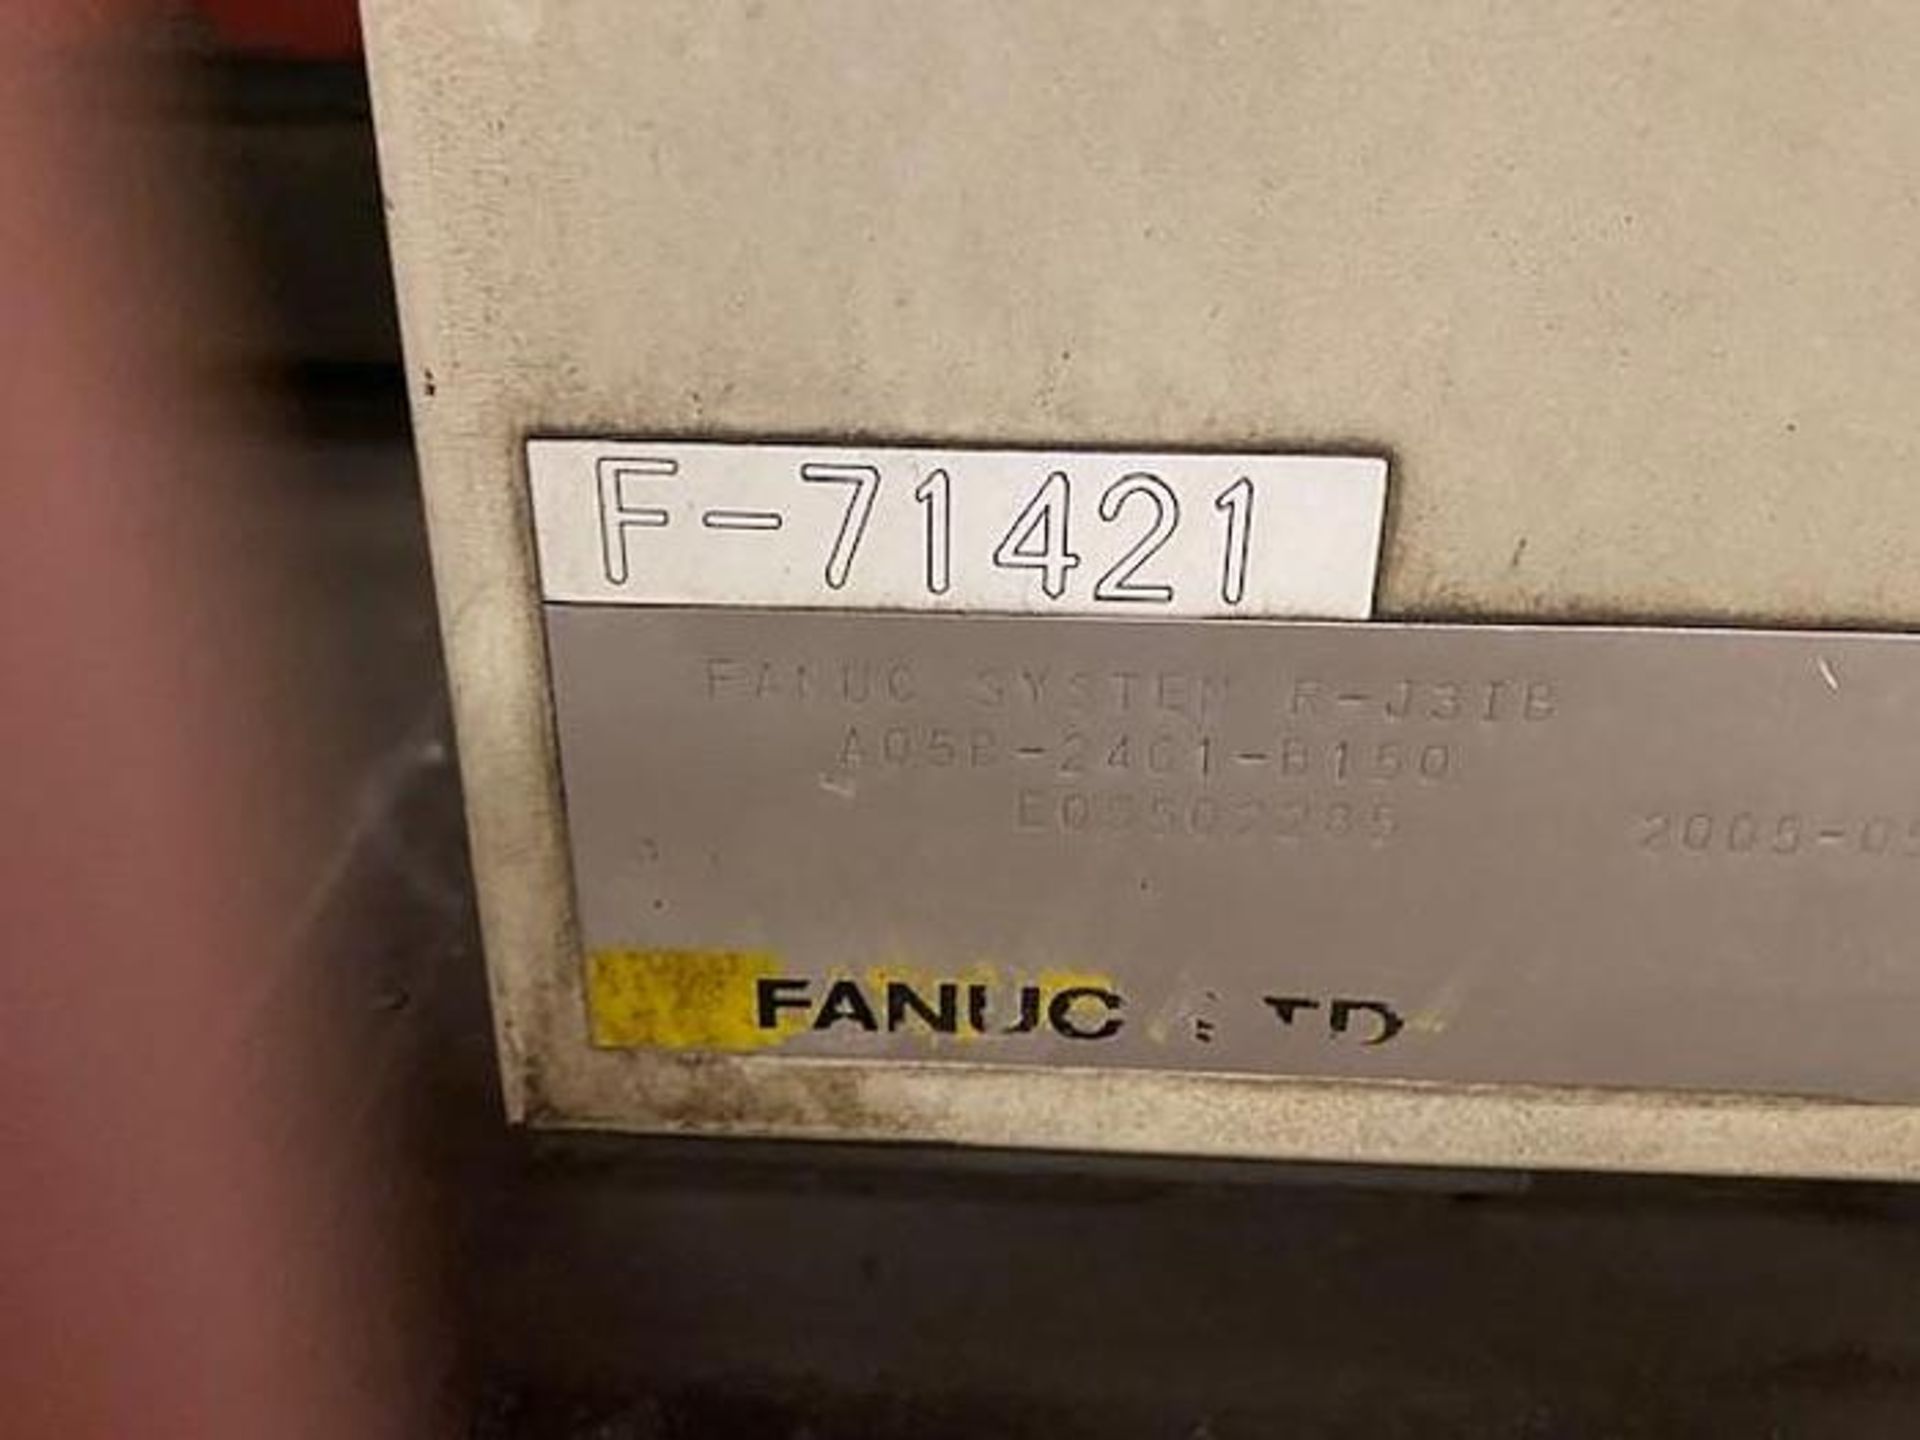 FANUC/LINCOLN DUAL TRUNION WELD CELL, FANUC ROBOT ARCMATE 120iB/10L WITH R-J3iB CONTROL - Image 11 of 11